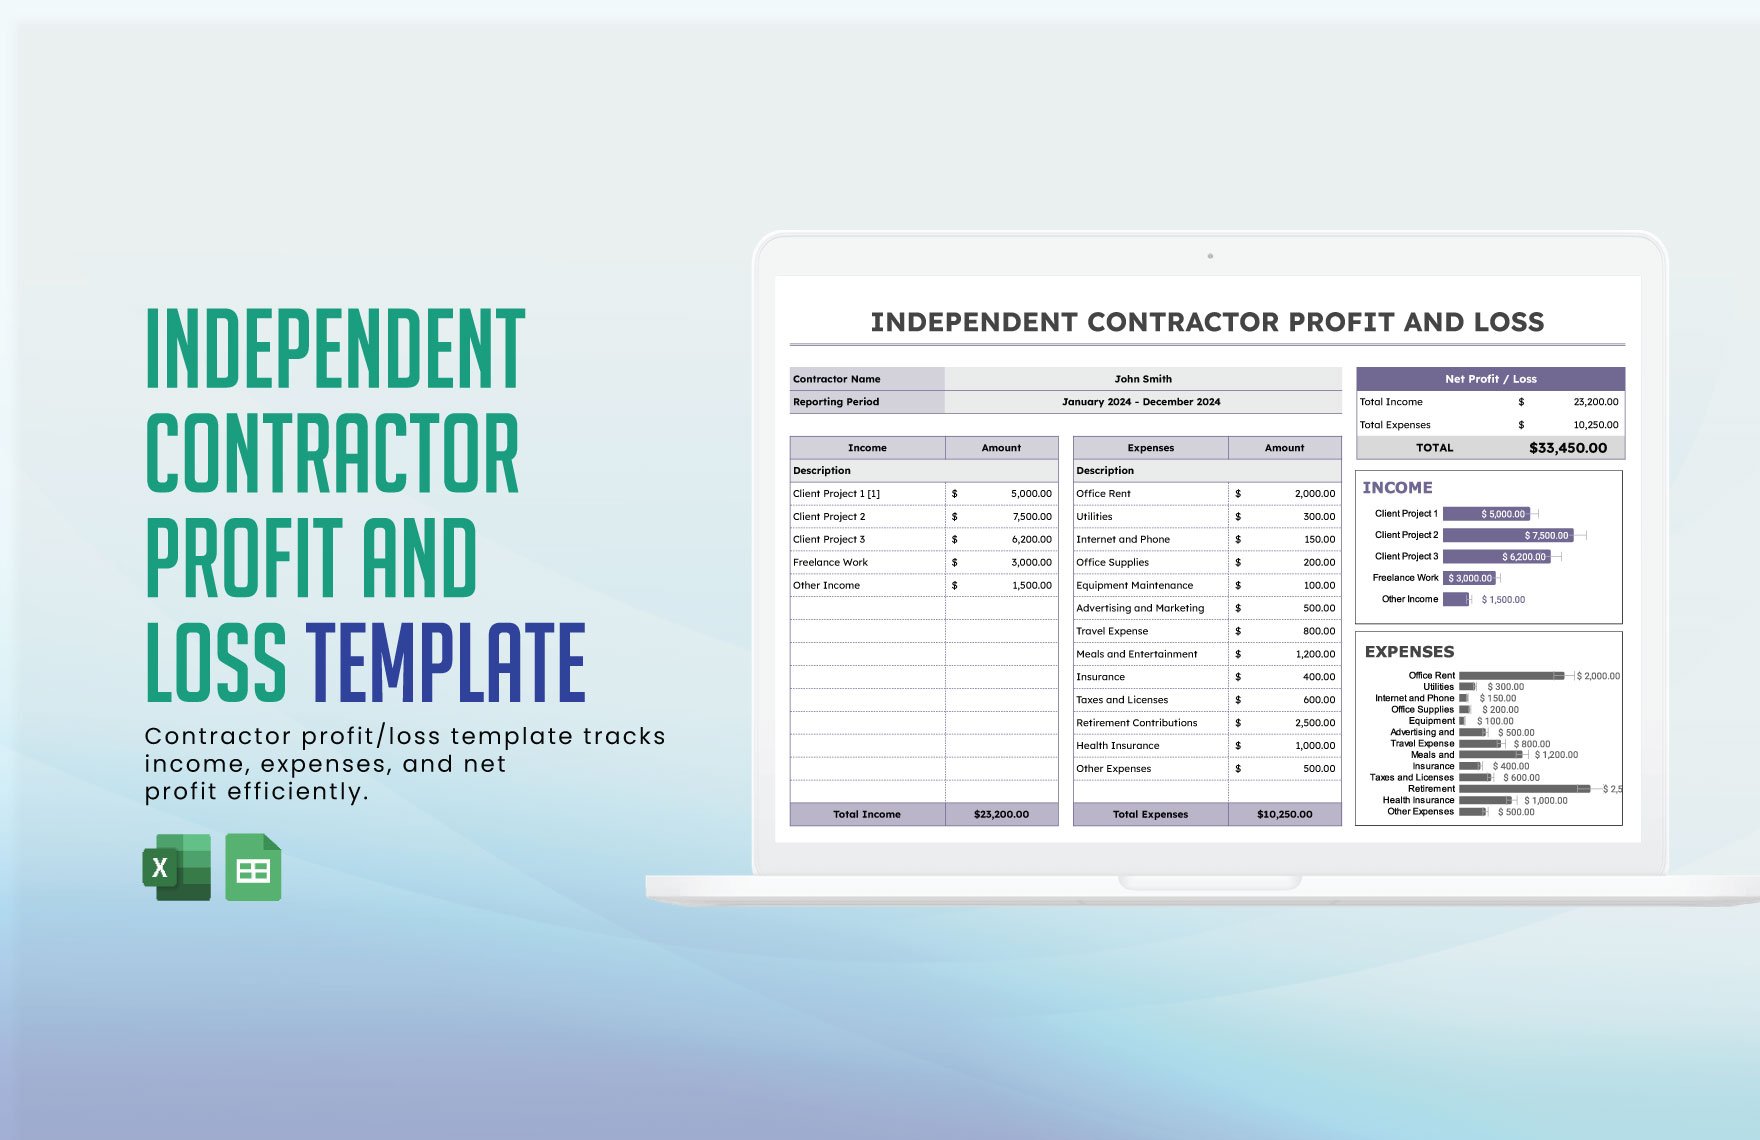 Independent Contractor Profit and Loss Template